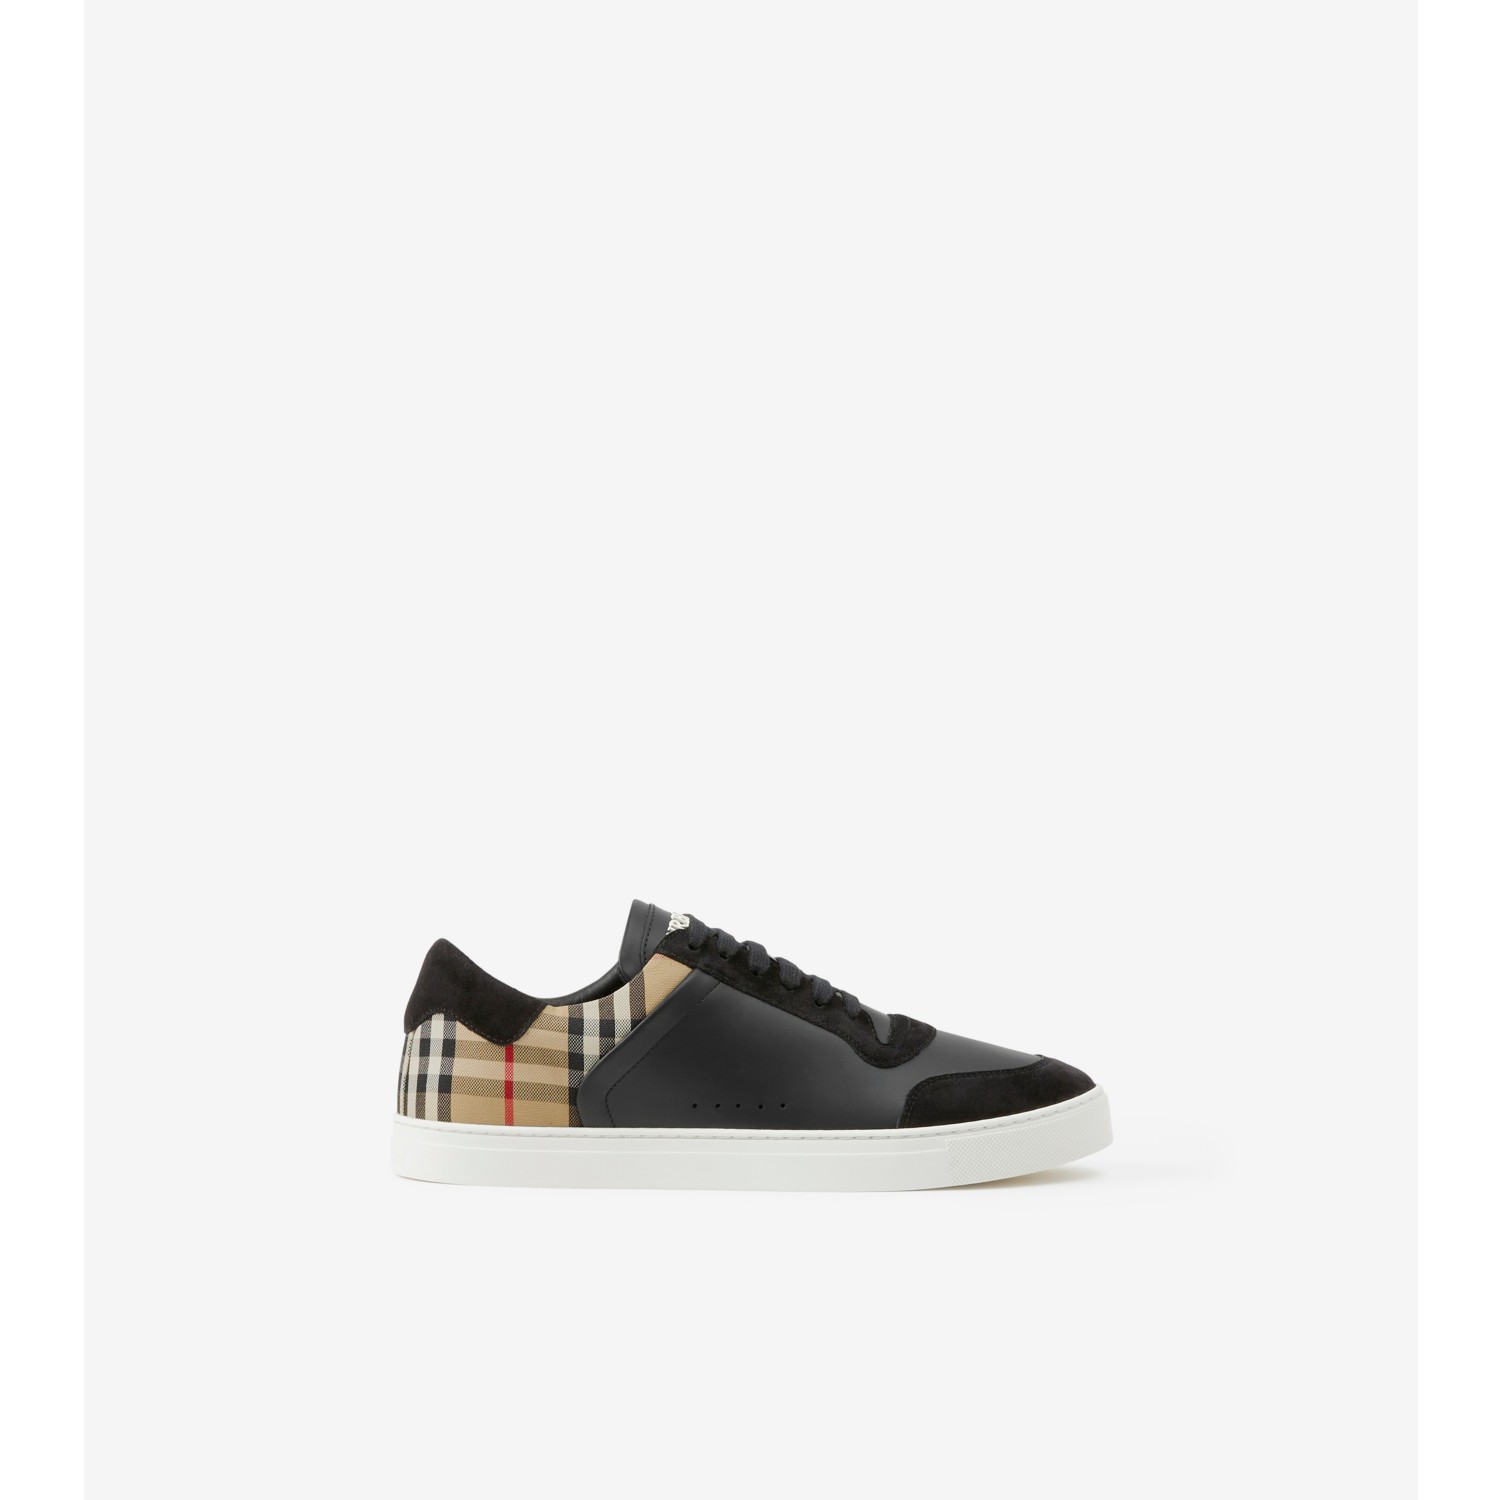 Leather, Suede and Check Sneakers in Black/archive beige - Men 